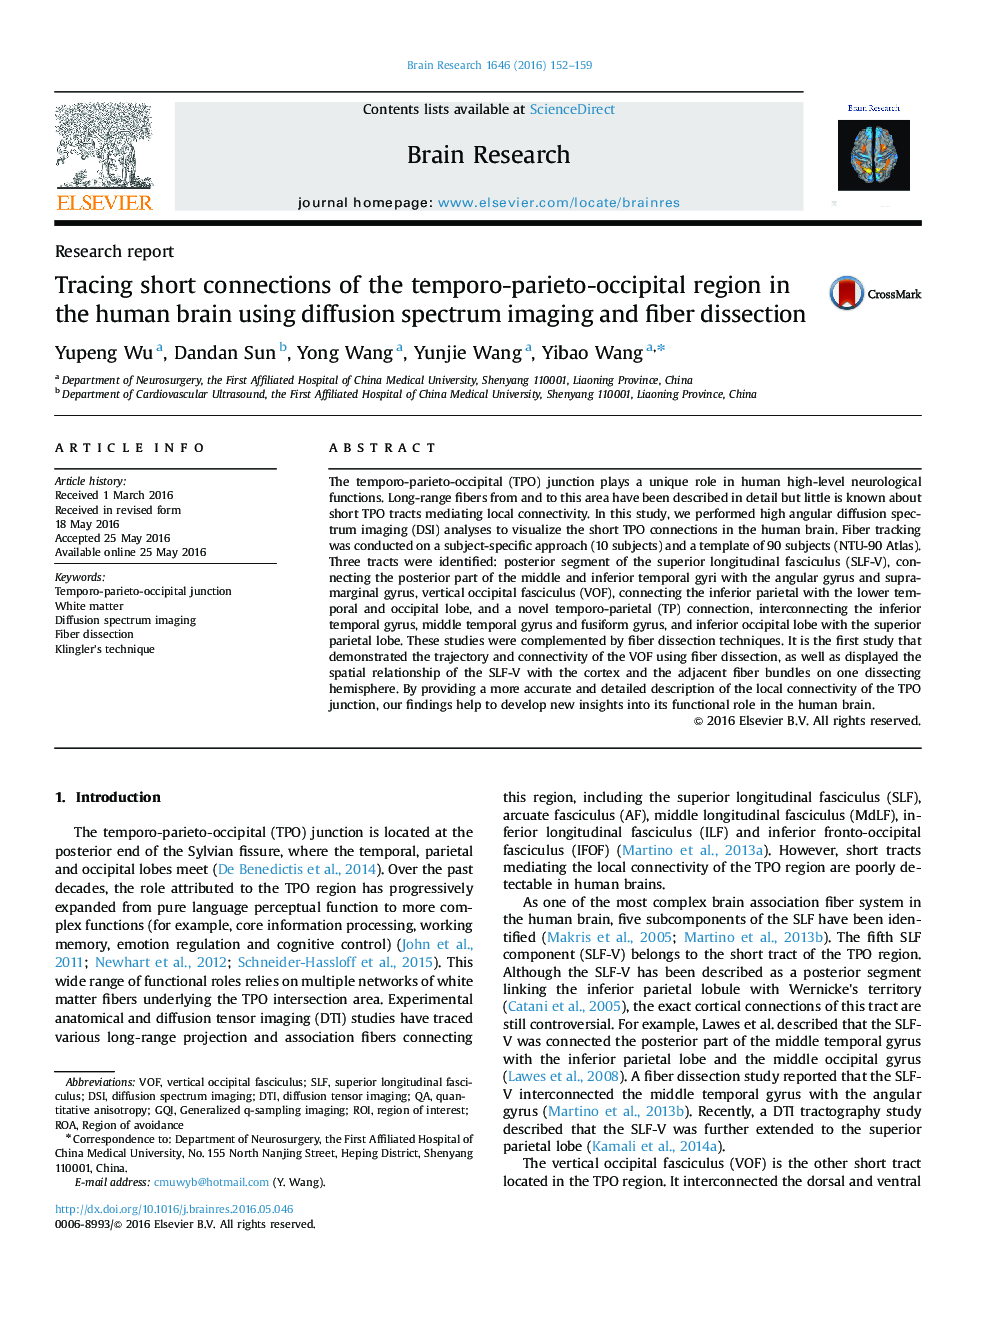 Research reportTracing short connections of the temporo-parieto-occipital region in the human brain using diffusion spectrum imaging and fiber dissection